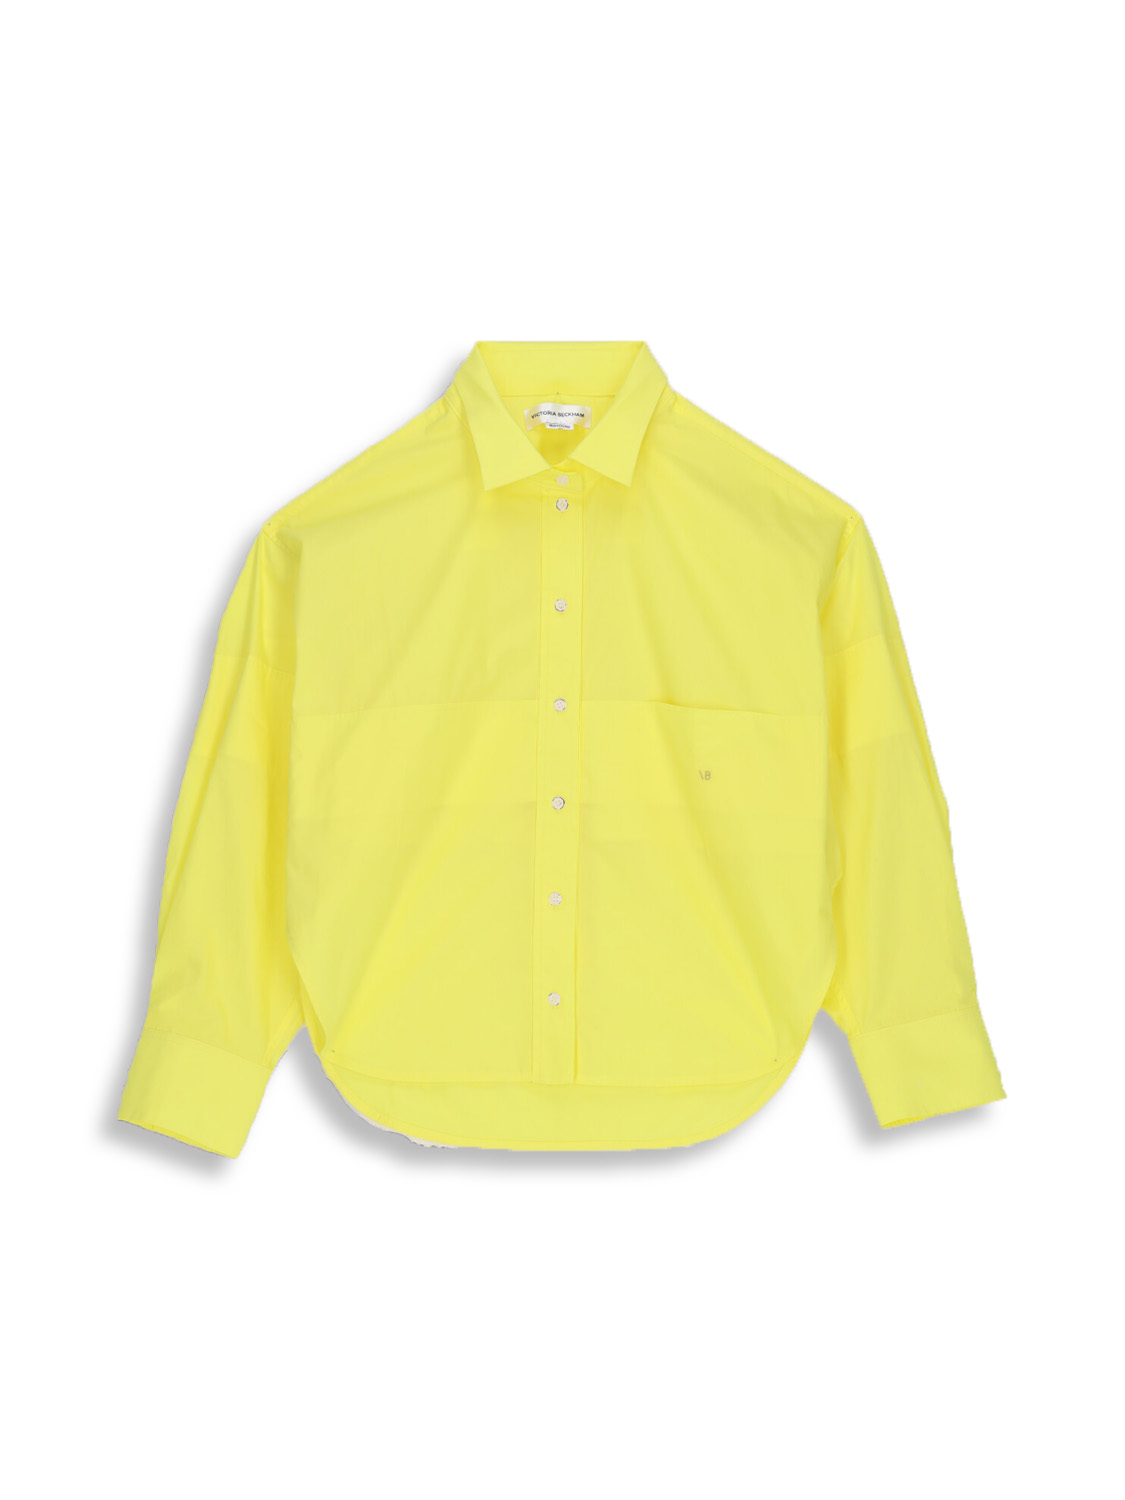 Tuck Detail Cropped Men's Shirt - Shirt blouse with overcut sleeves